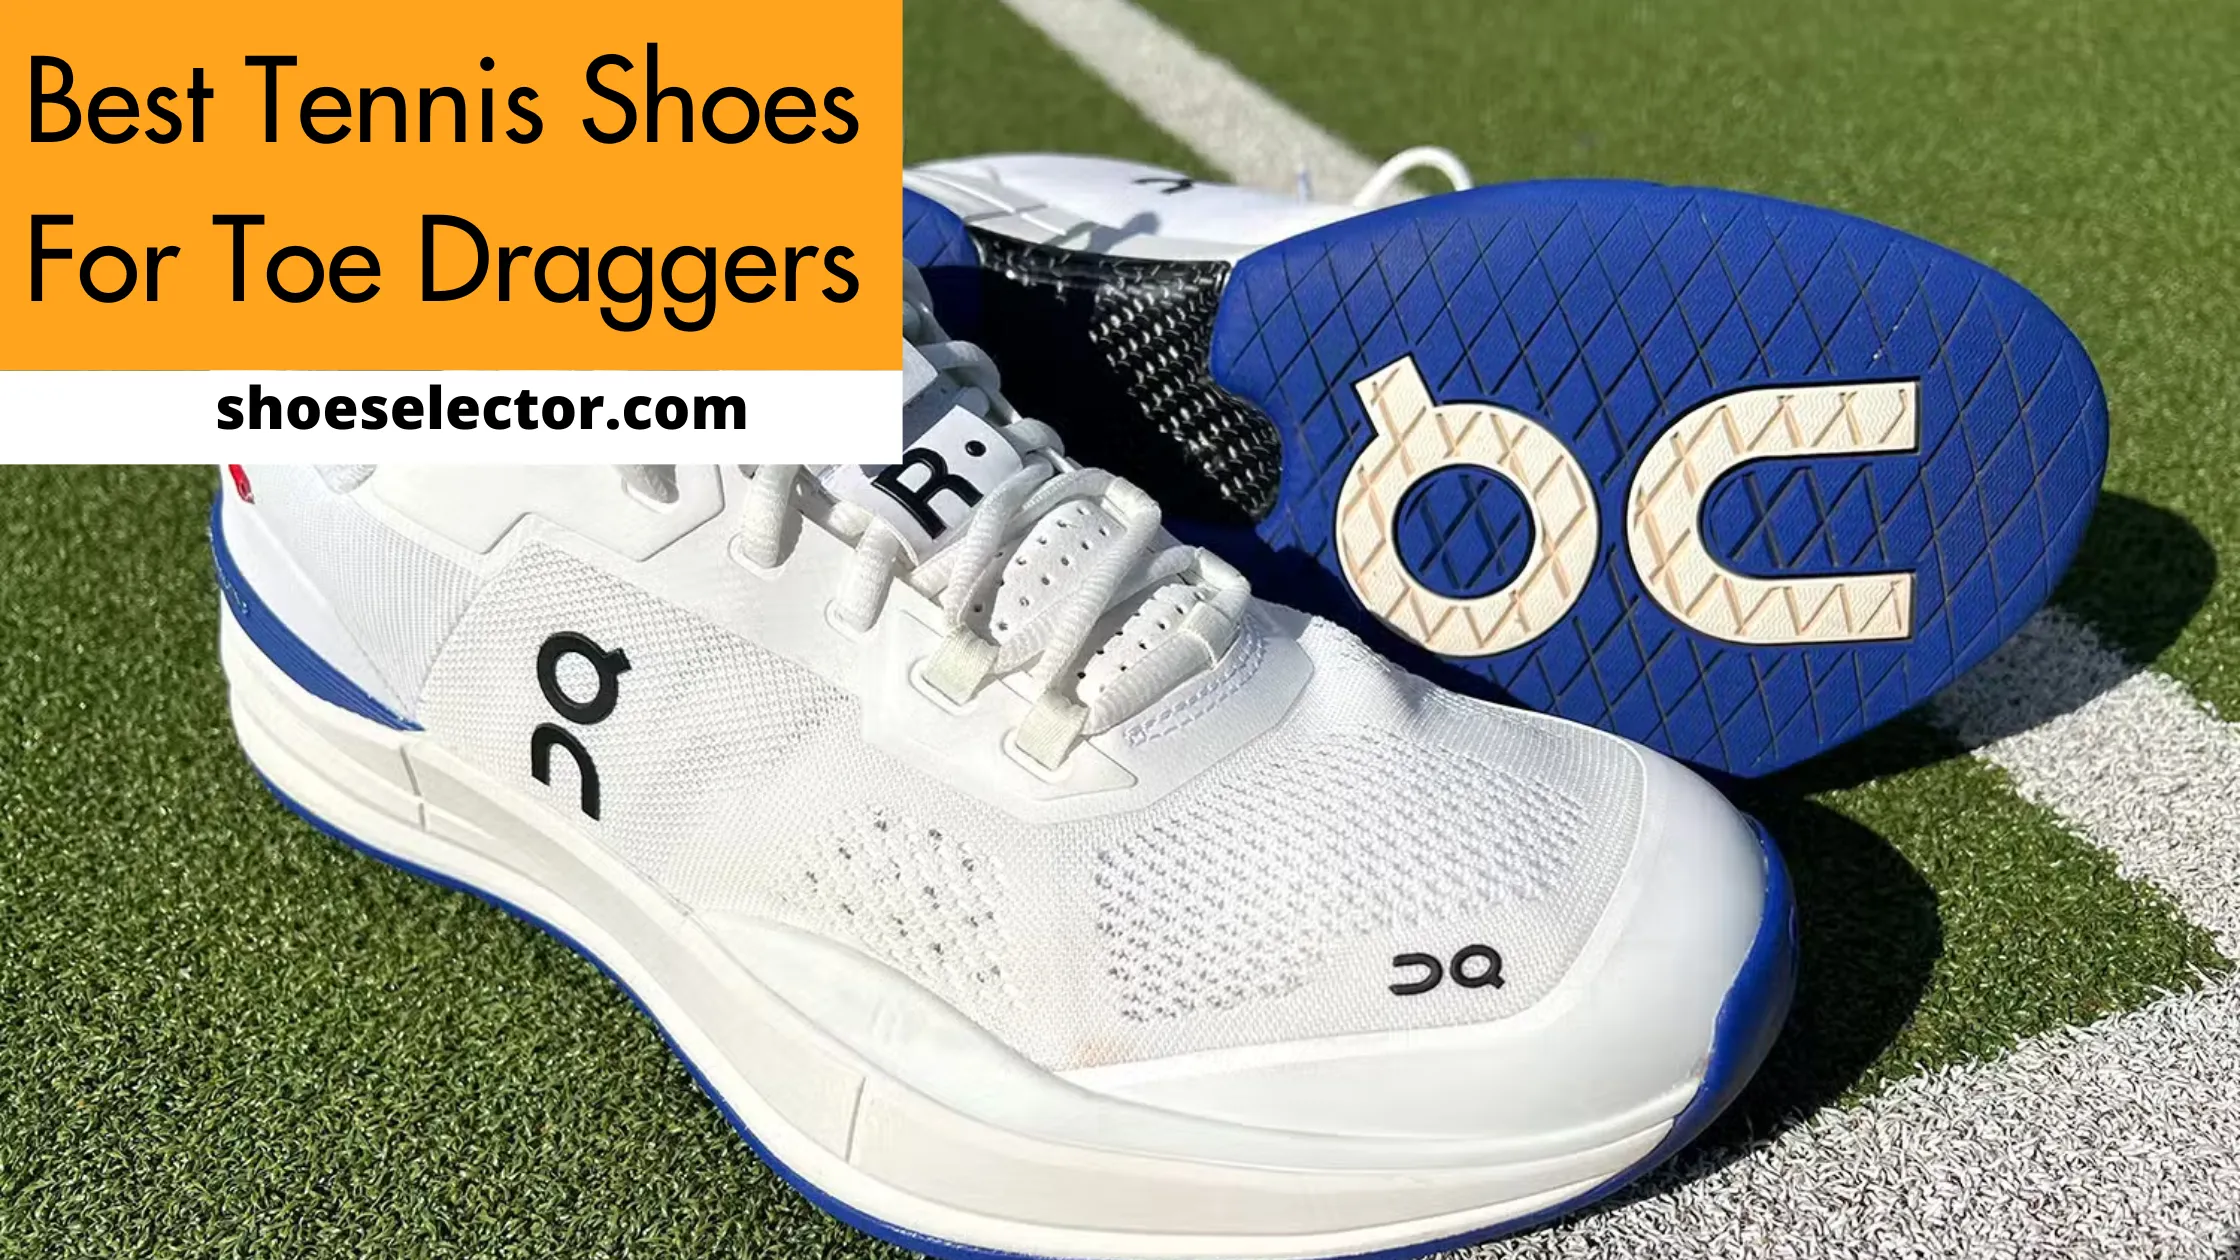 Best Tennis Shoes For Toe Draggers - Complete Guide